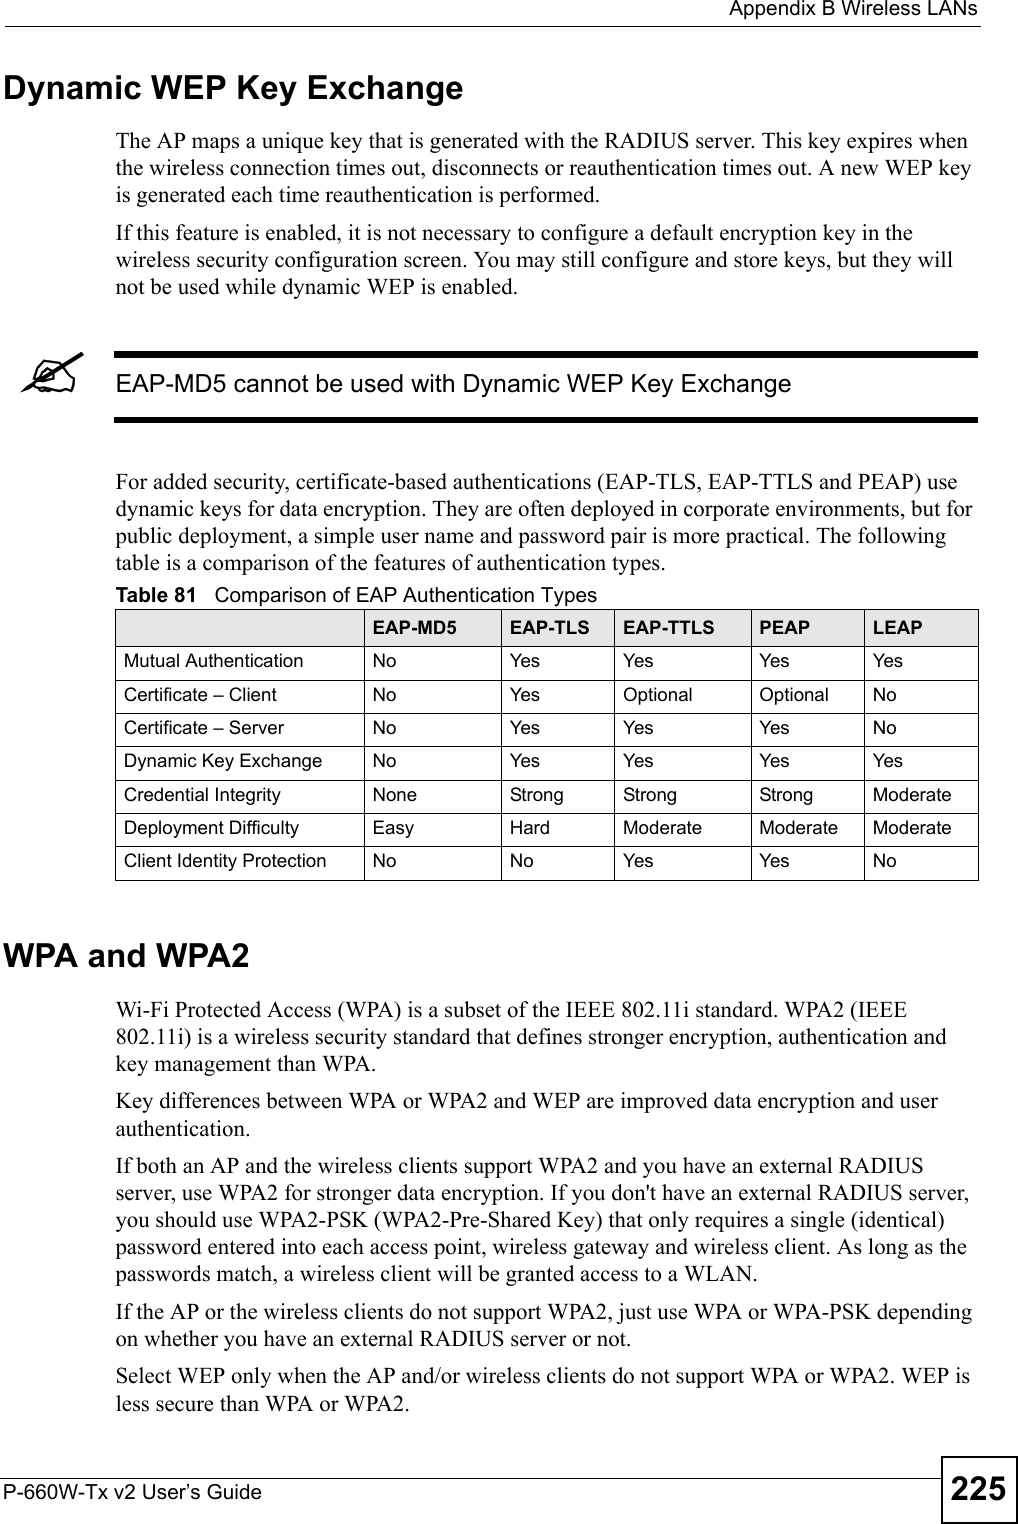  Appendix B Wireless LANsP-660W-Tx v2 User’s Guide 225Dynamic WEP Key ExchangeThe AP maps a unique key that is generated with the RADIUS server. This key expires when the wireless connection times out, disconnects or reauthentication times out. A new WEP key is generated each time reauthentication is performed.If this feature is enabled, it is not necessary to configure a default encryption key in the wireless security configuration screen. You may still configure and store keys, but they will not be used while dynamic WEP is enabled.&quot;EAP-MD5 cannot be used with Dynamic WEP Key ExchangeFor added security, certificate-based authentications (EAP-TLS, EAP-TTLS and PEAP) use dynamic keys for data encryption. They are often deployed in corporate environments, but for public deployment, a simple user name and password pair is more practical. The following table is a comparison of the features of authentication types.WPA and WPA2Wi-Fi Protected Access (WPA) is a subset of the IEEE 802.11i standard. WPA2 (IEEE 802.11i) is a wireless security standard that defines stronger encryption, authentication and key management than WPA. Key differences between WPA or WPA2 and WEP are improved data encryption and user authentication.If both an AP and the wireless clients support WPA2 and you have an external RADIUS server, use WPA2 for stronger data encryption. If you don&apos;t have an external RADIUS server, you should use WPA2-PSK (WPA2-Pre-Shared Key) that only requires a single (identical) password entered into each access point, wireless gateway and wireless client. As long as the passwords match, a wireless client will be granted access to a WLAN. If the AP or the wireless clients do not support WPA2, just use WPA or WPA-PSK depending on whether you have an external RADIUS server or not.Select WEP only when the AP and/or wireless clients do not support WPA or WPA2. WEP is less secure than WPA or WPA2.Table 81   Comparison of EAP Authentication TypesEAP-MD5 EAP-TLS EAP-TTLS PEAP LEAPMutual Authentication No Yes Yes Yes YesCertificate – Client No Yes Optional Optional NoCertificate – Server No Yes Yes Yes NoDynamic Key Exchange No Yes Yes Yes YesCredential Integrity None Strong Strong Strong ModerateDeployment Difficulty Easy Hard Moderate Moderate ModerateClient Identity Protection No No Yes Yes No